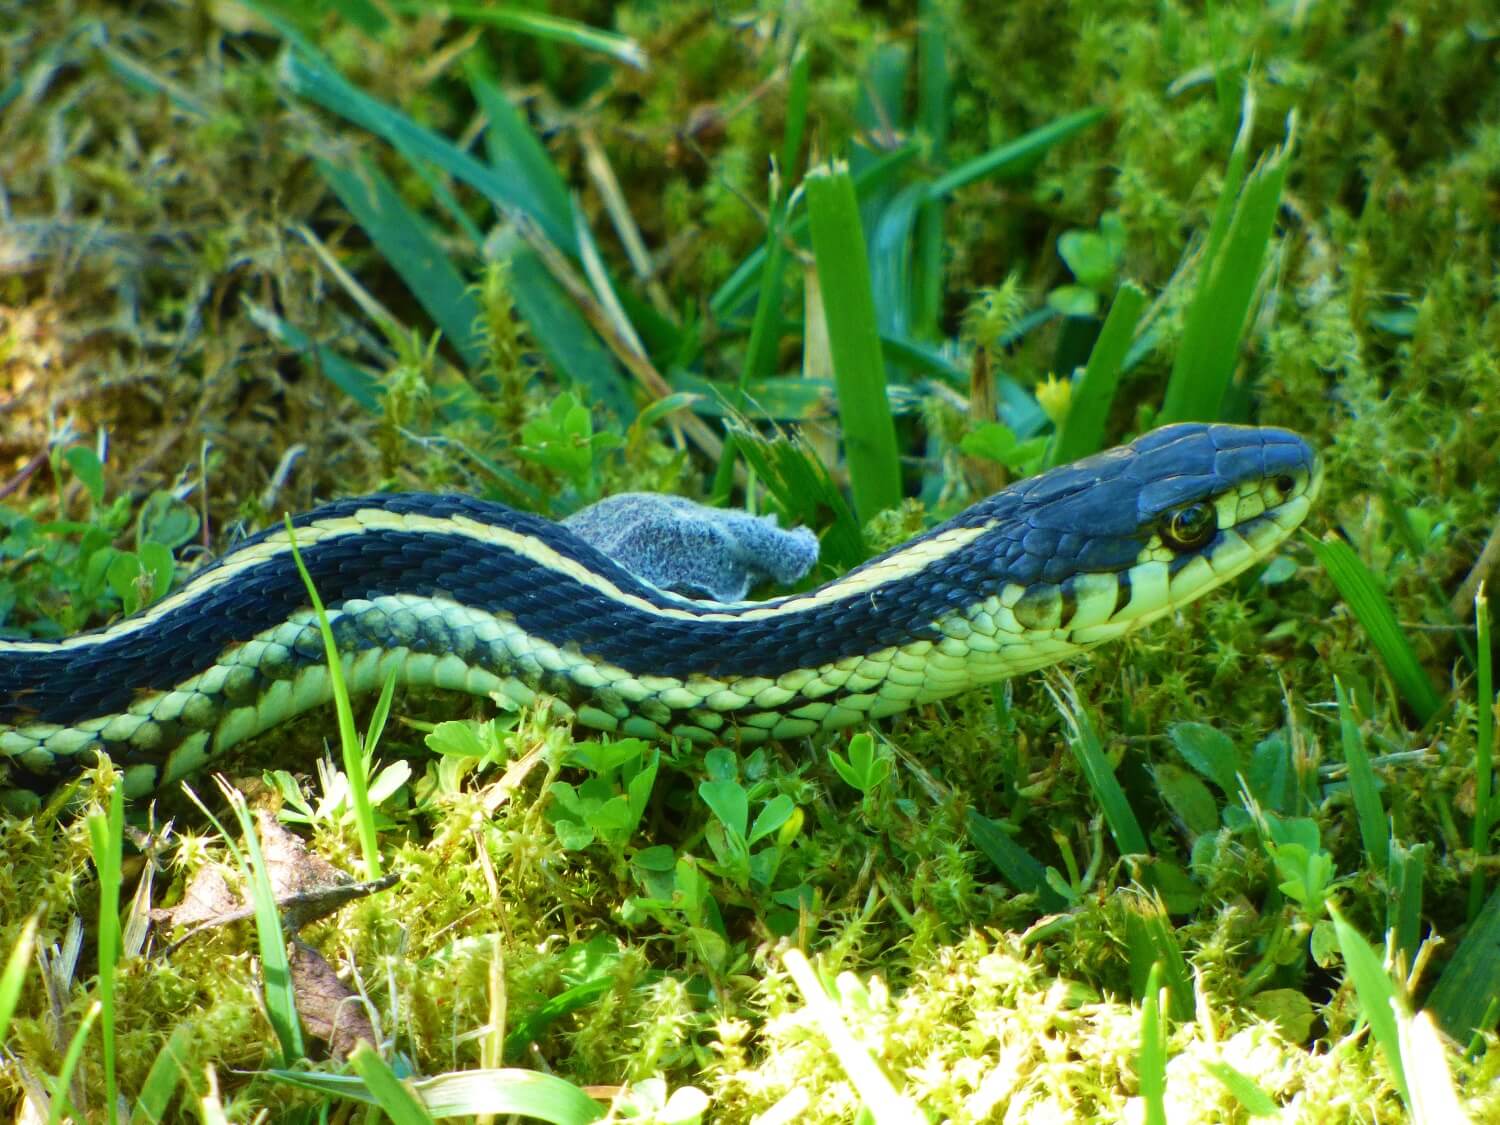 Black and green snake in the garden